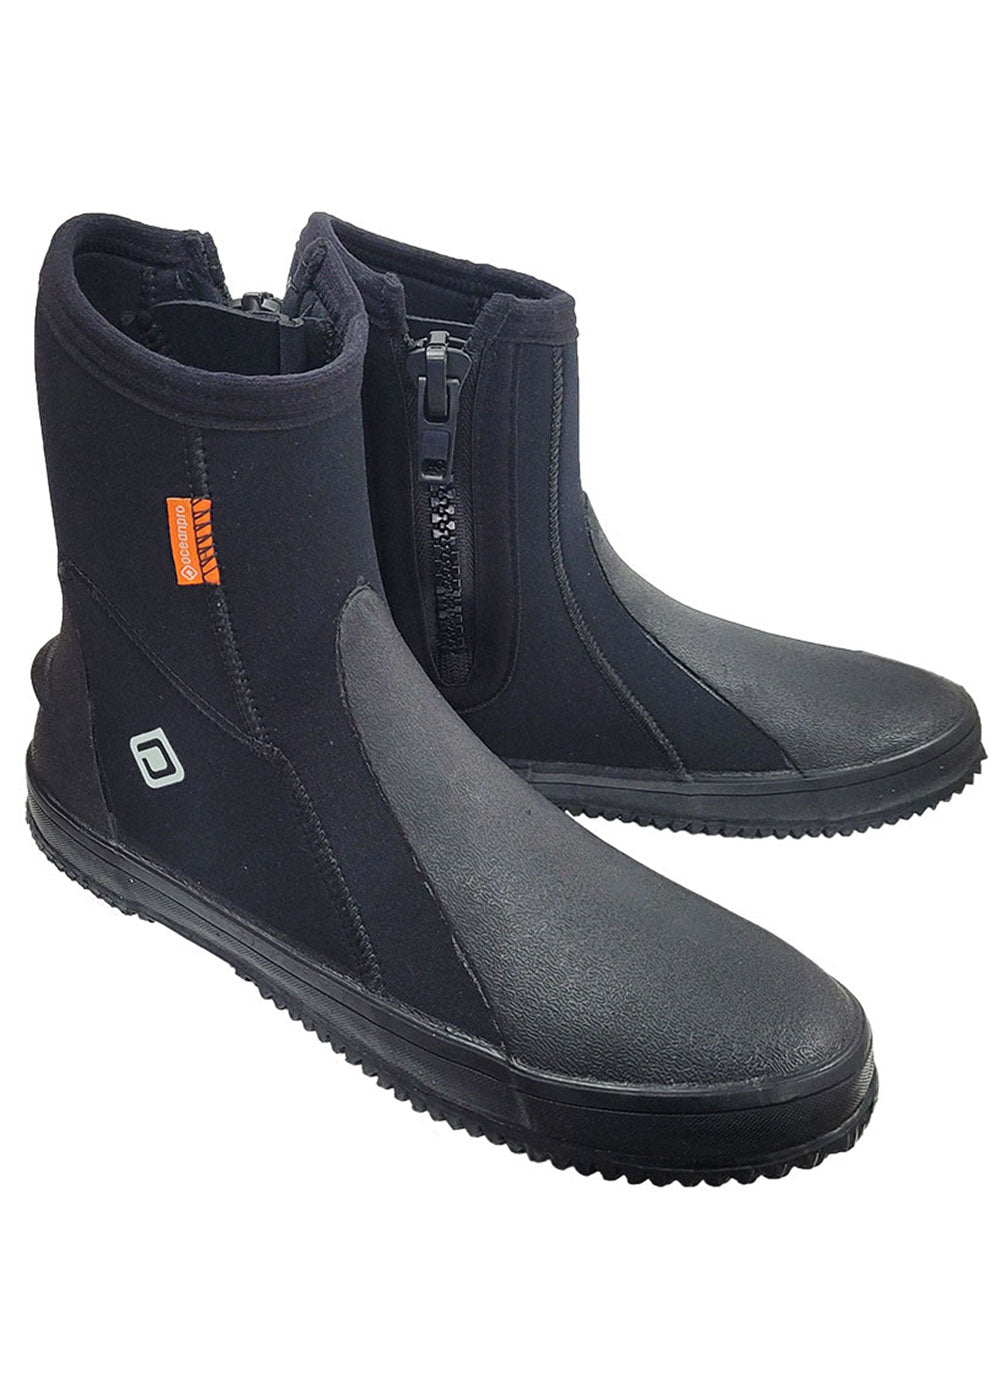 Ocean Pro Mission Boot